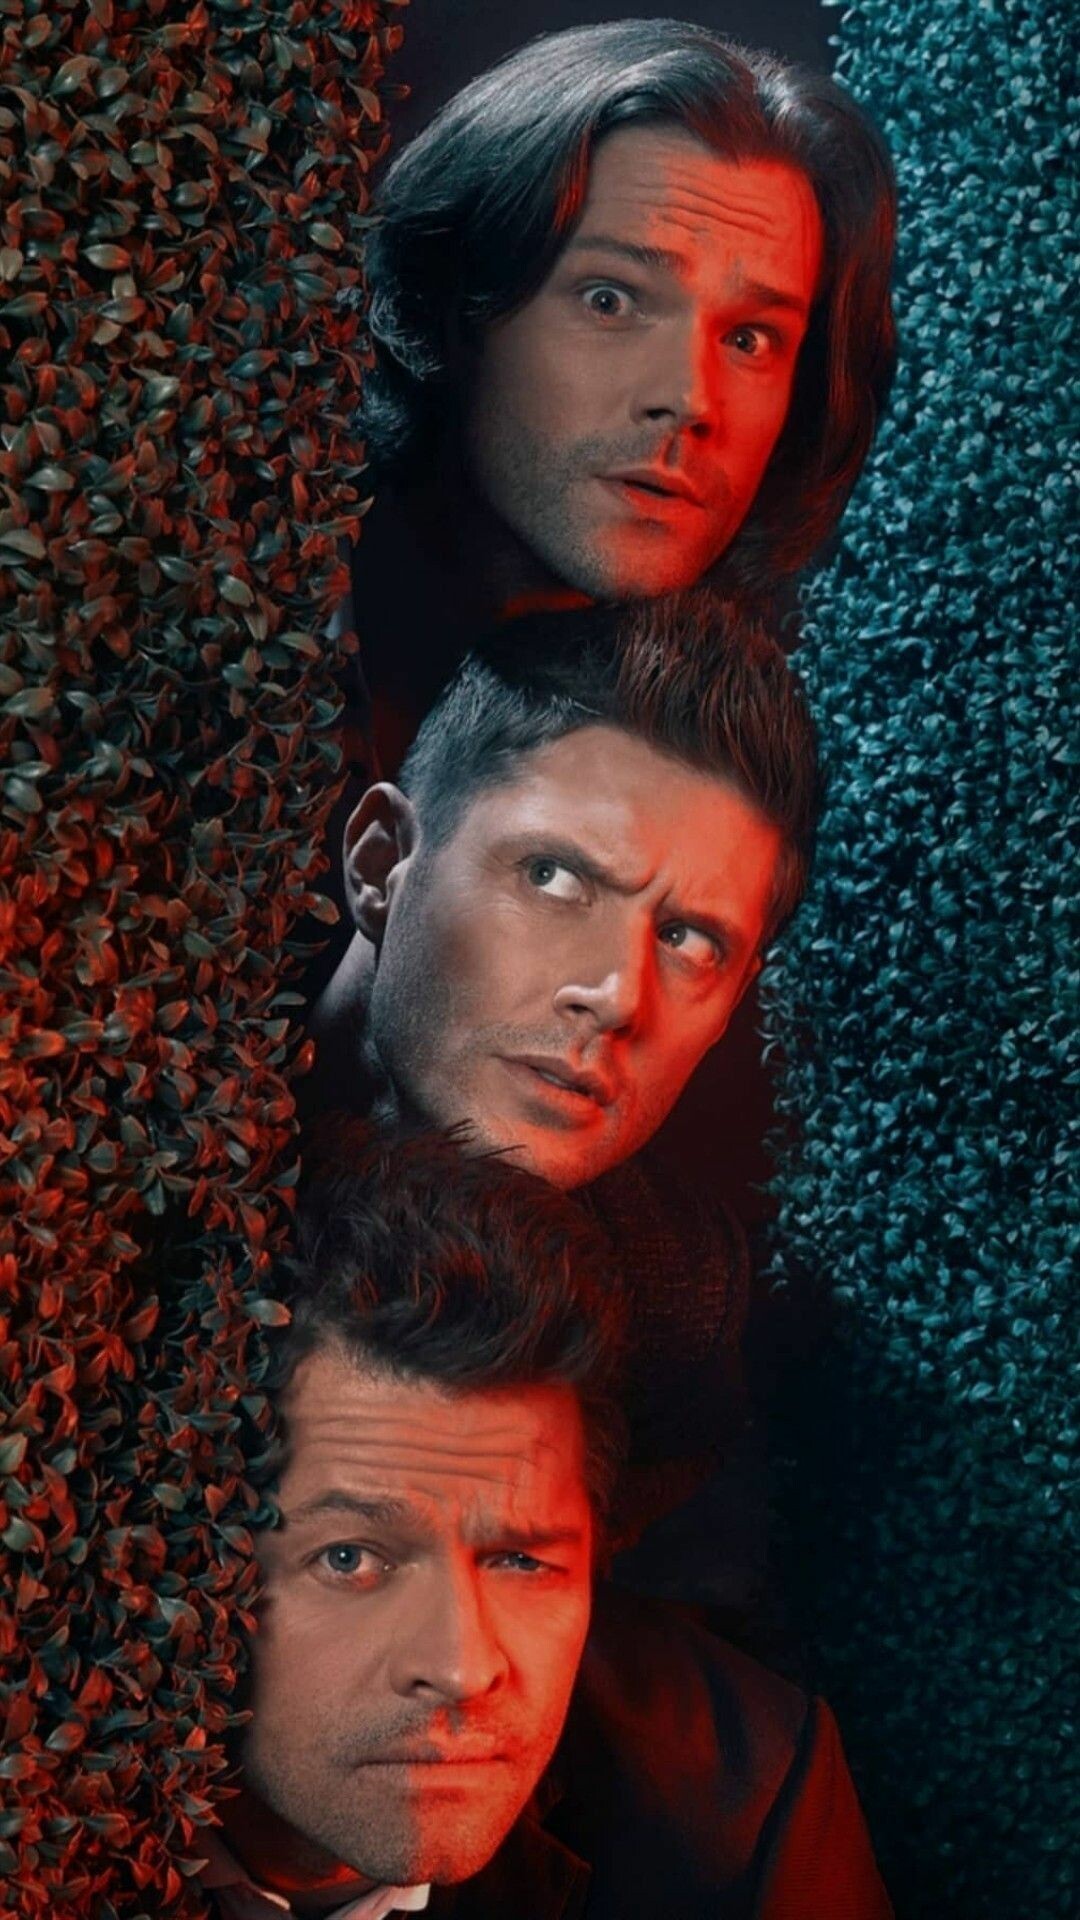 Supernatural: Two brothers who hunted monsters together while in search of their missing father. 1080x1920 Full HD Wallpaper.